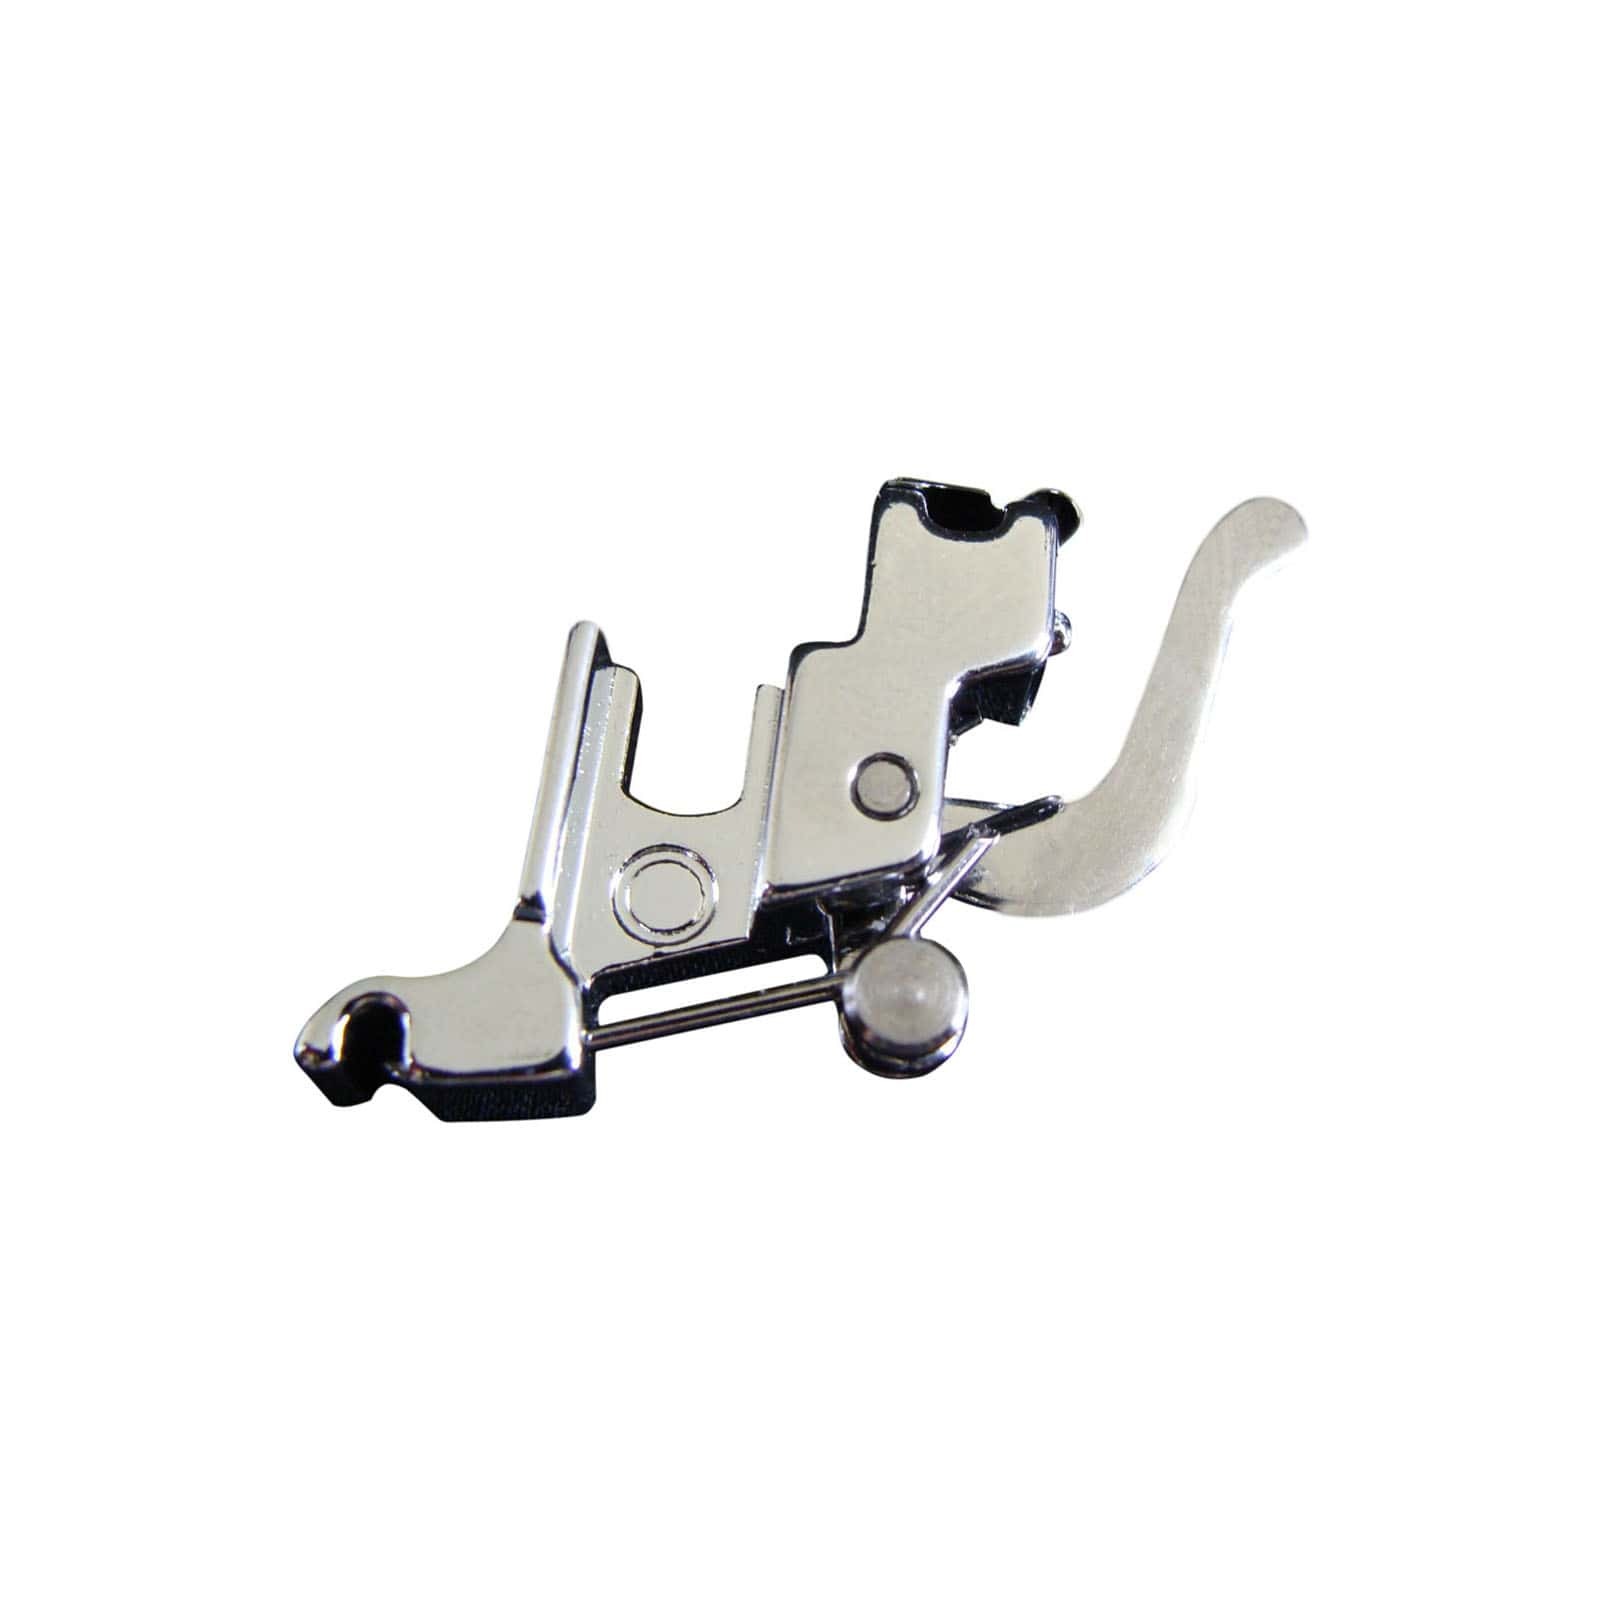 New Low Shank Domestic Home Sewing Machine Snap On Presser Foot Holder Useful 